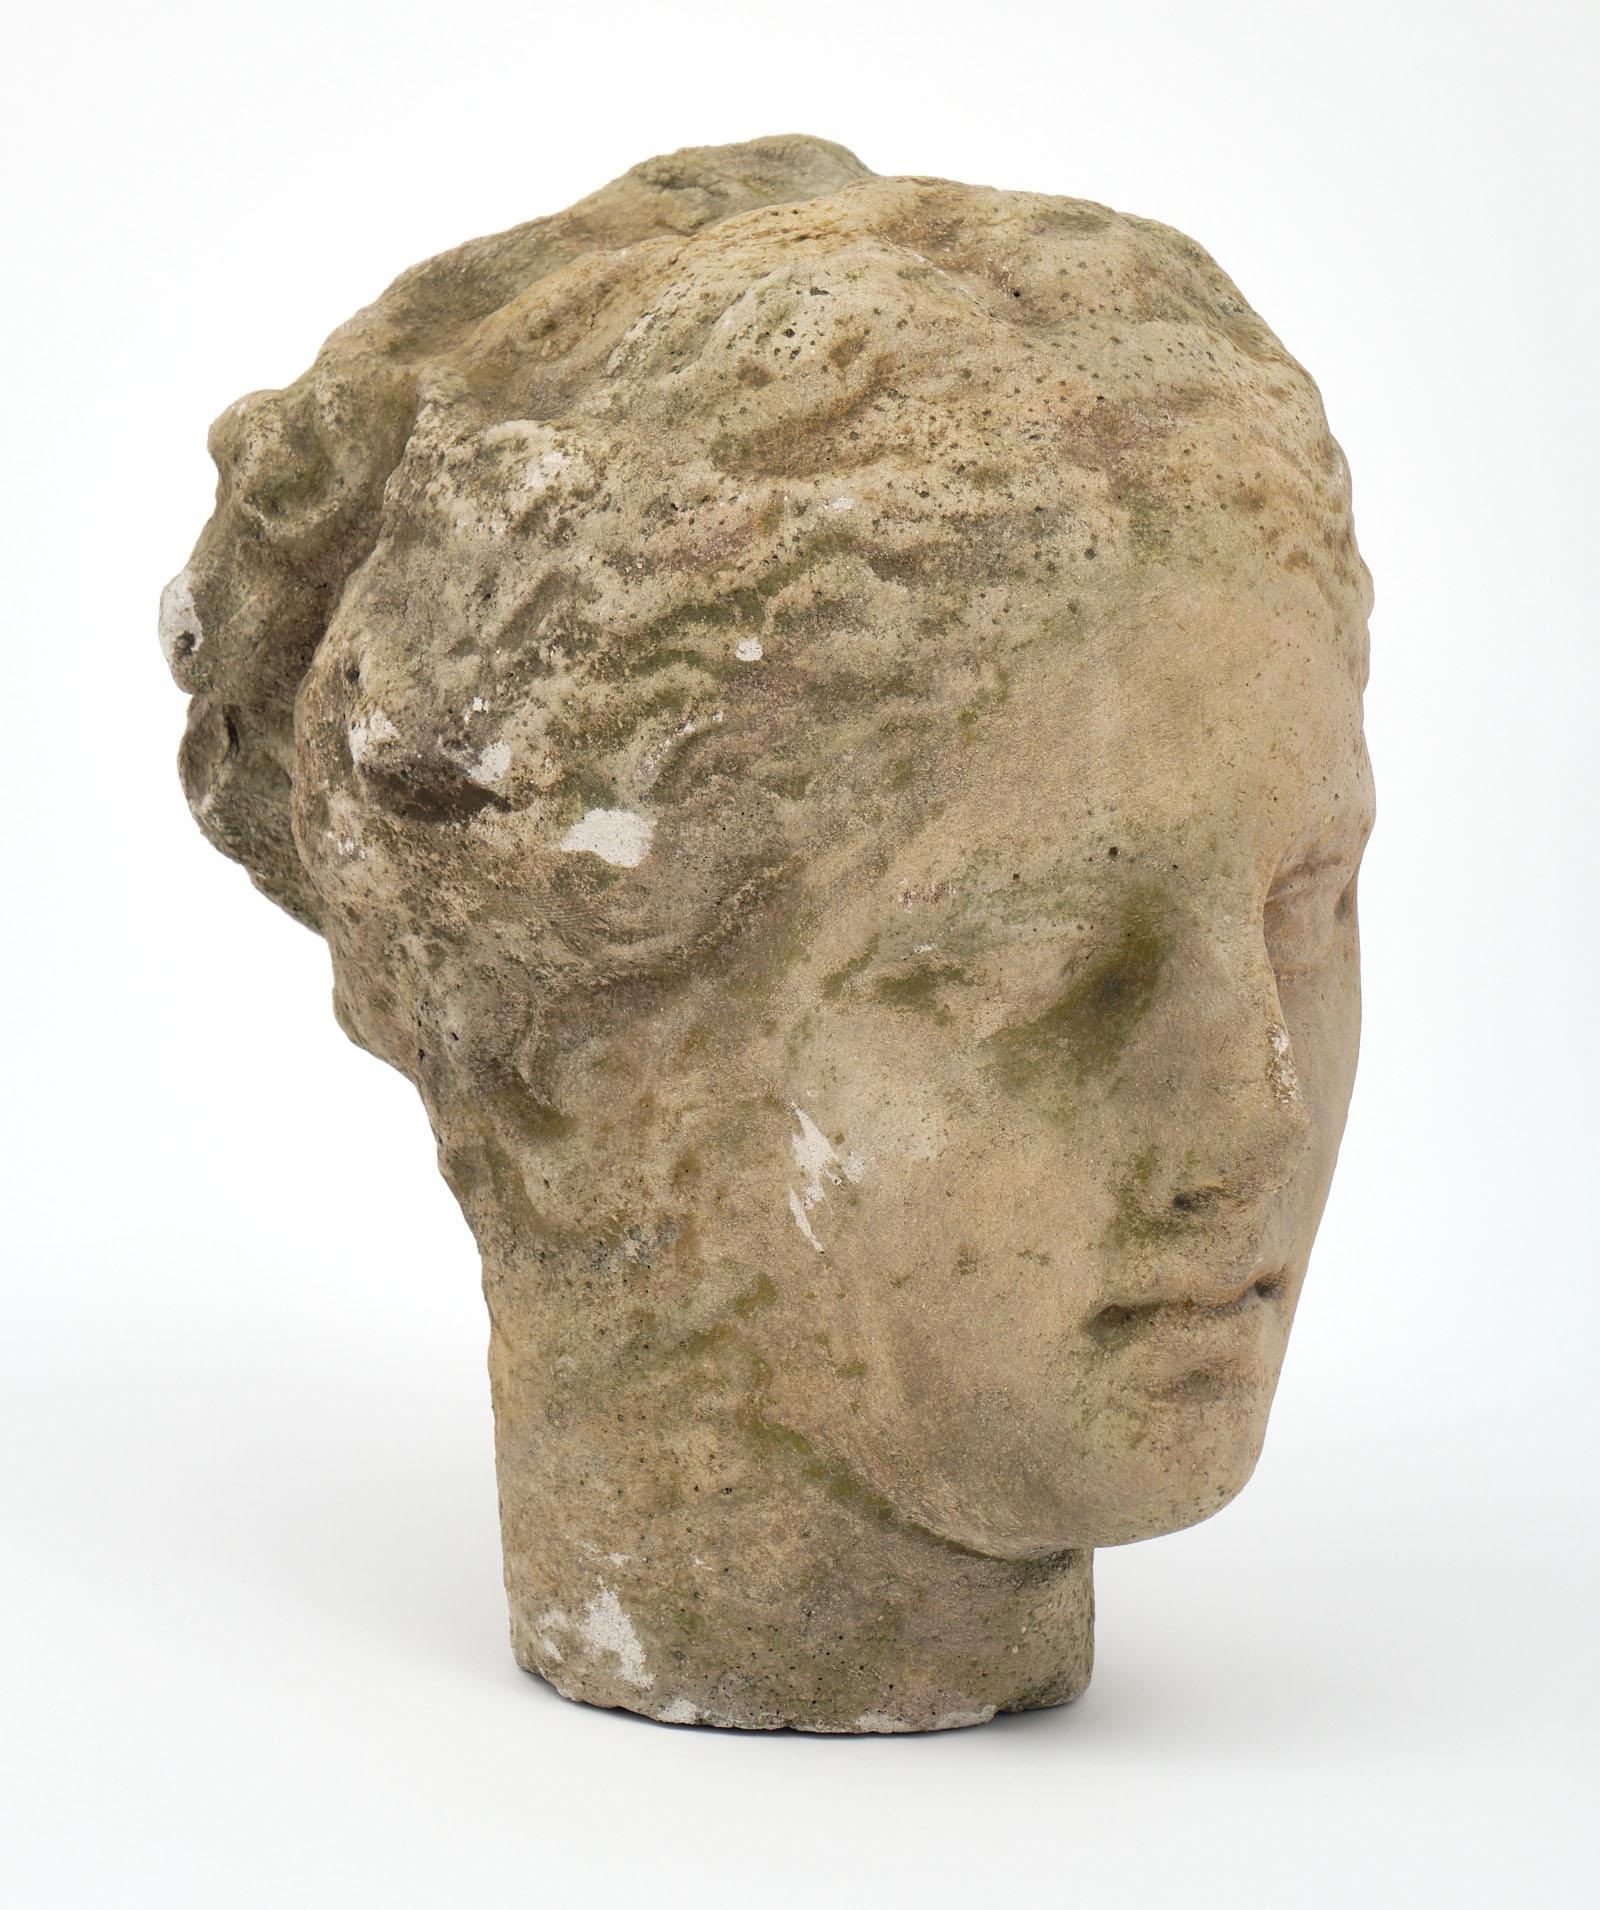 Antique stone bust of Athena. This piece made of reconstituted stone takes the form of Greek goddess Athena. We love the details of this interesting piece.